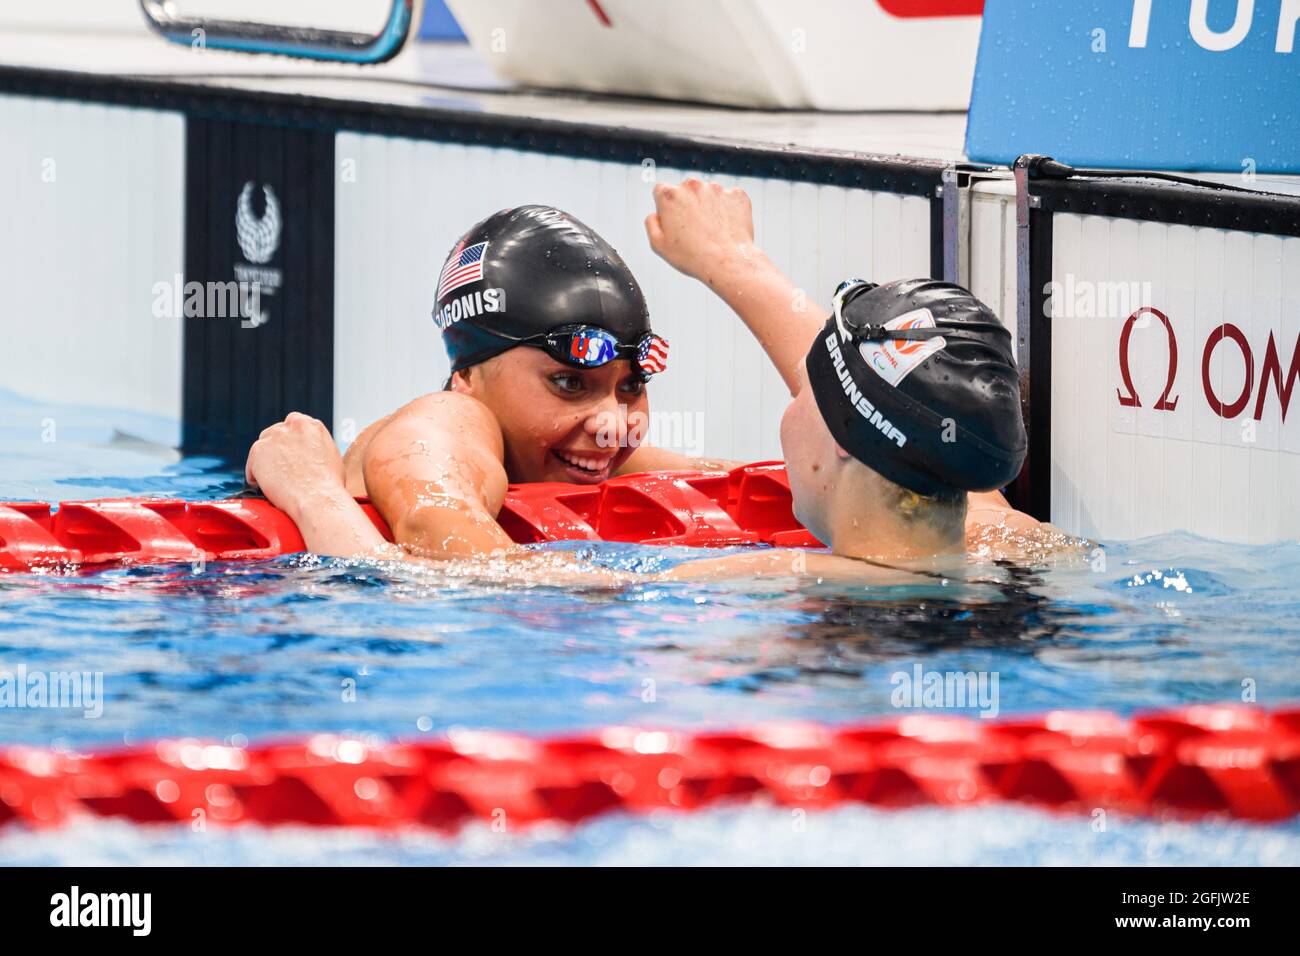 TOKYO, JAPAN. 26th Aug, 2021. Anastacia Pagonis of USA won the Women’s 400m Freestyle S11 during Swimming Finals of the Tokyo 2020 Paralympic Games at Tokyo Aquatics Centre on Thursday, August 26, 2021 in TOKYO, JAPAN. Credit: Taka G Wu/Alamy Live News Stock Photo